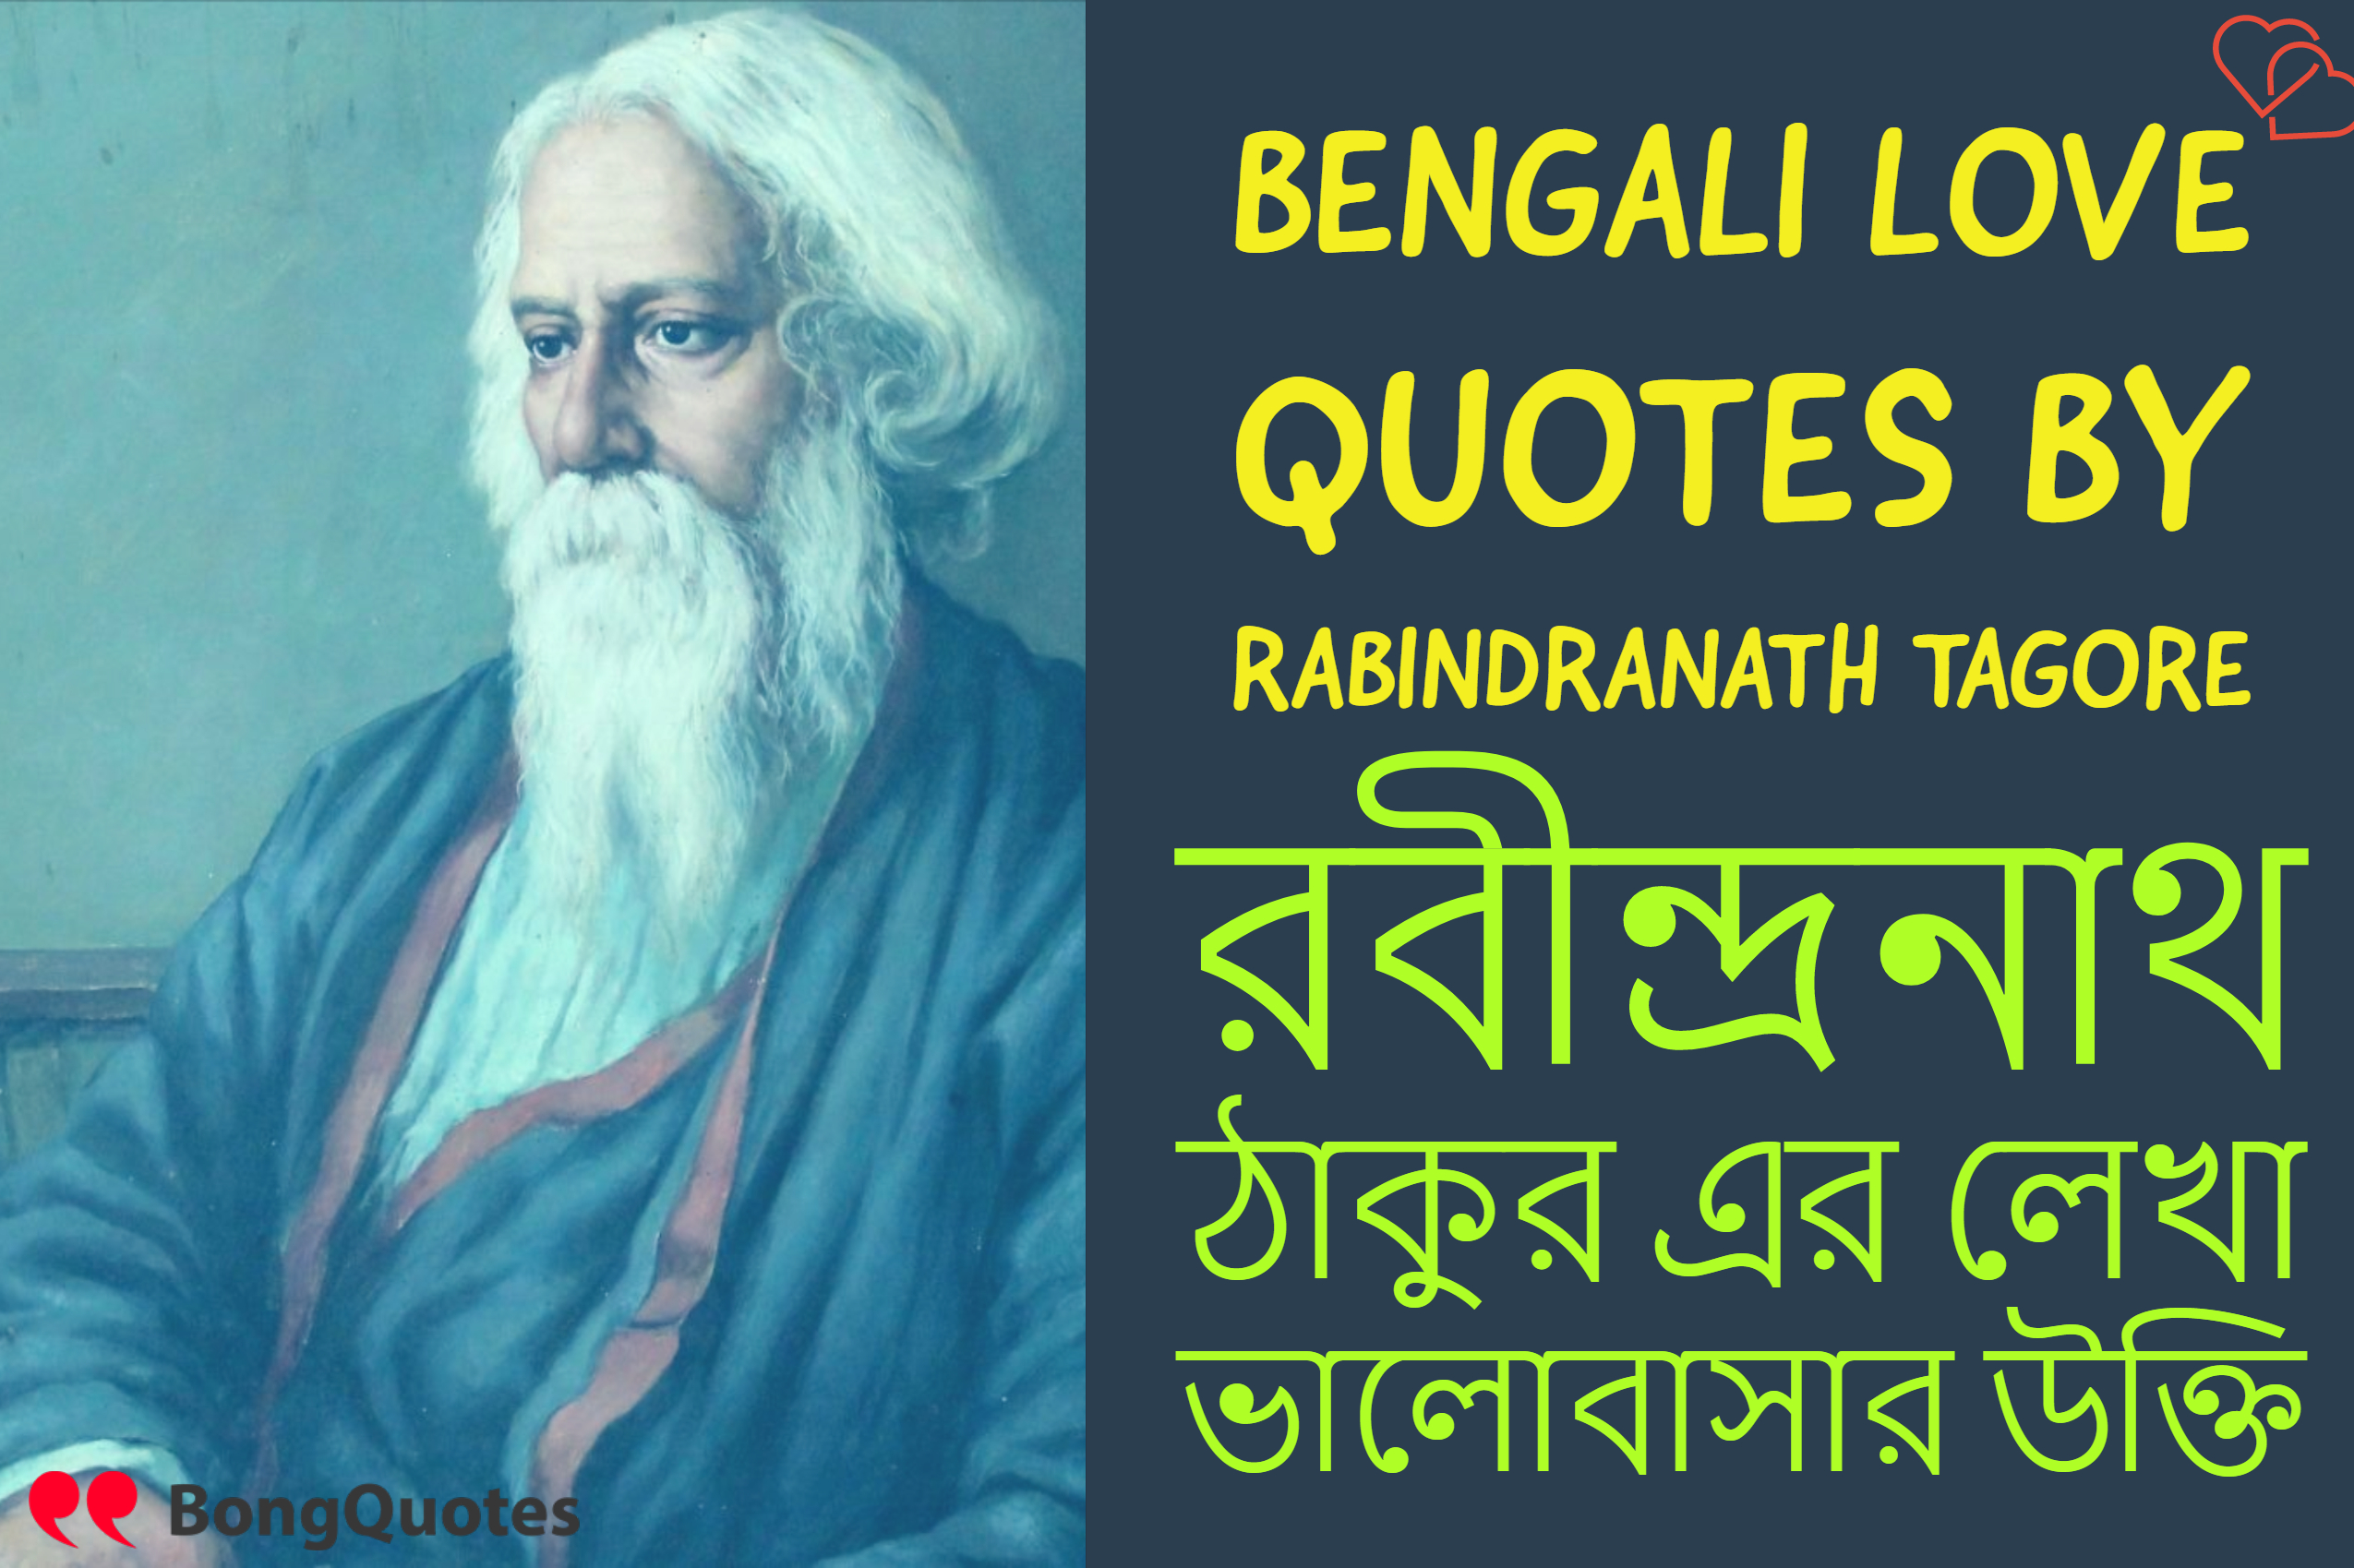 Bengali Love Quotes & Images By Rabindranath Tagore With English Translation